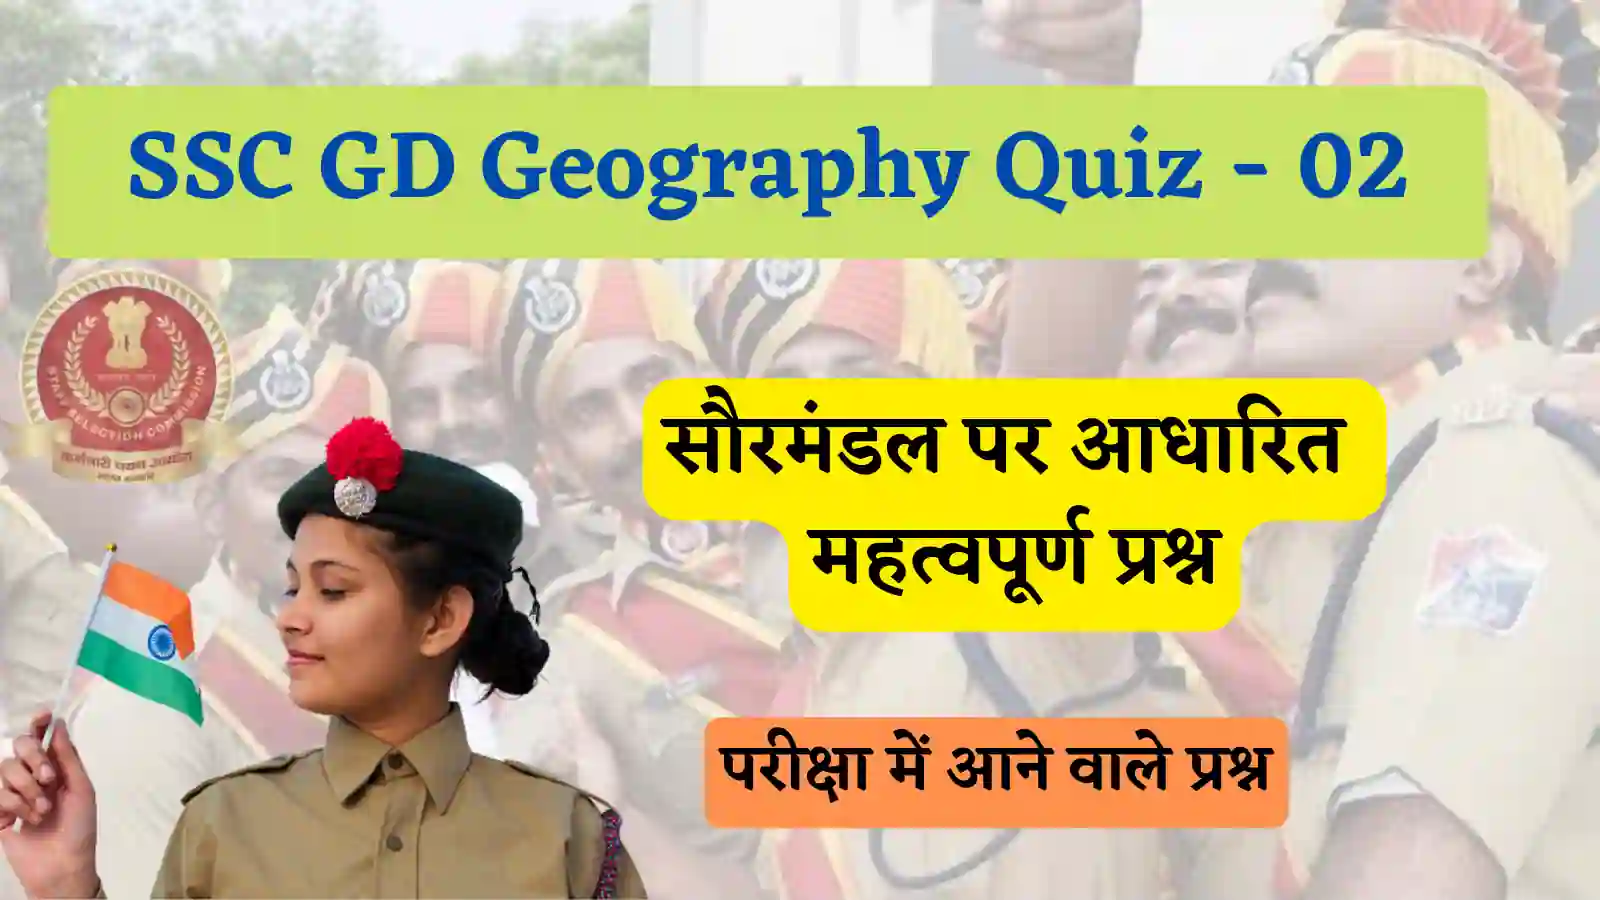 SSC GD Geography Quiz - 02